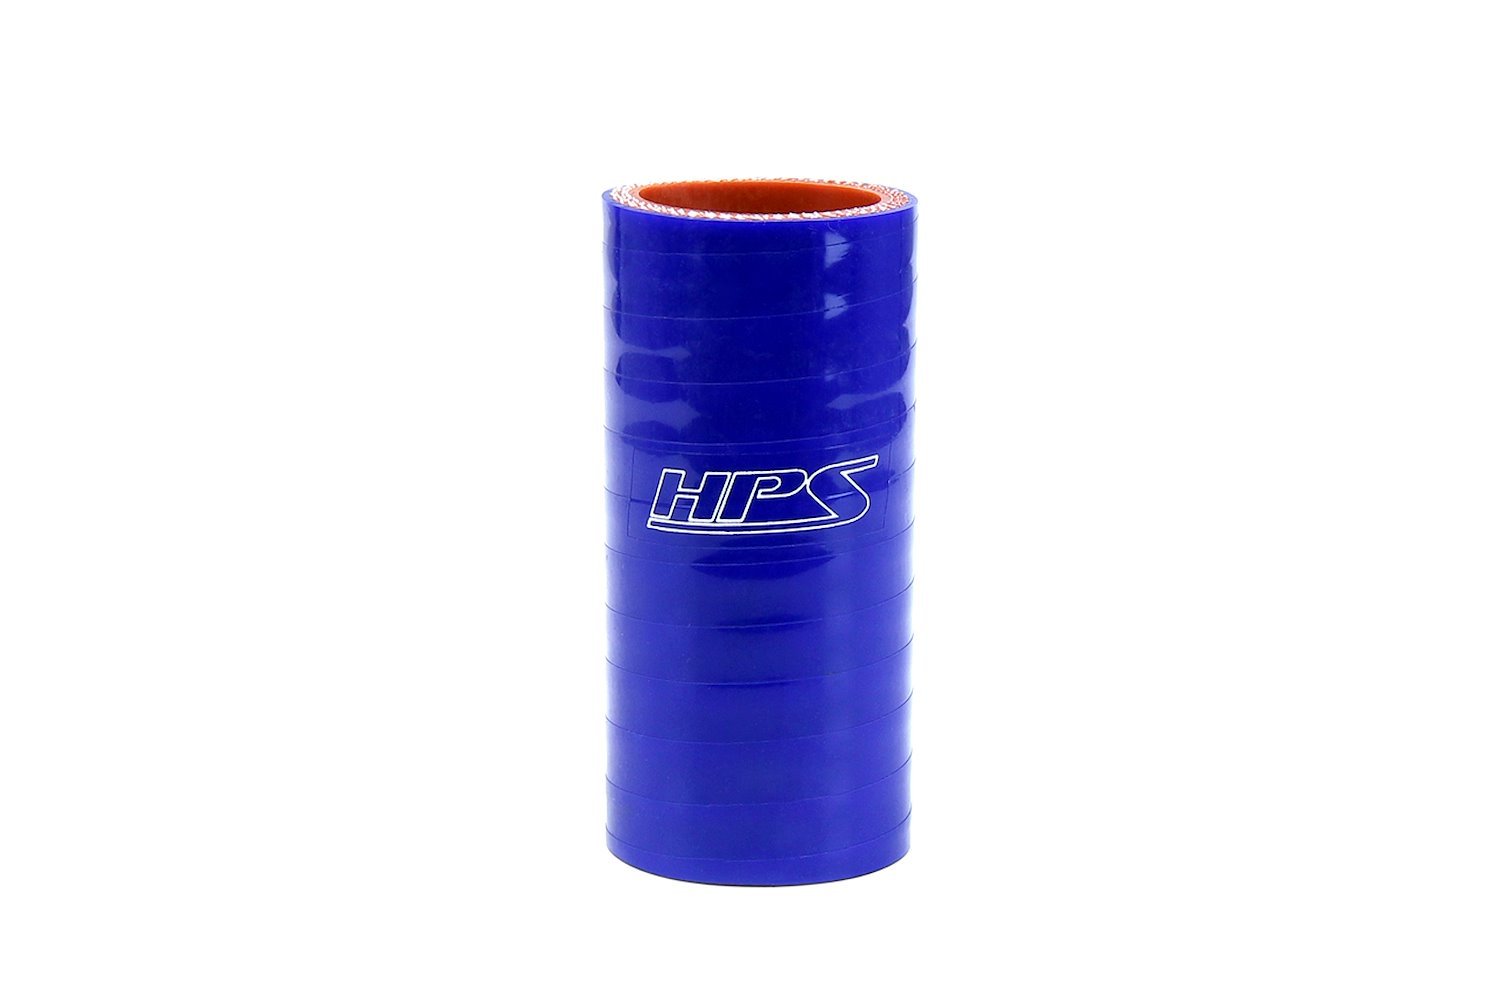 HTSC-125-L4-BLUE Silicone Coupler Hose, High-Temp 4-Ply Reinforced, 1-1/4 in. ID, 4 in. Long, Blue